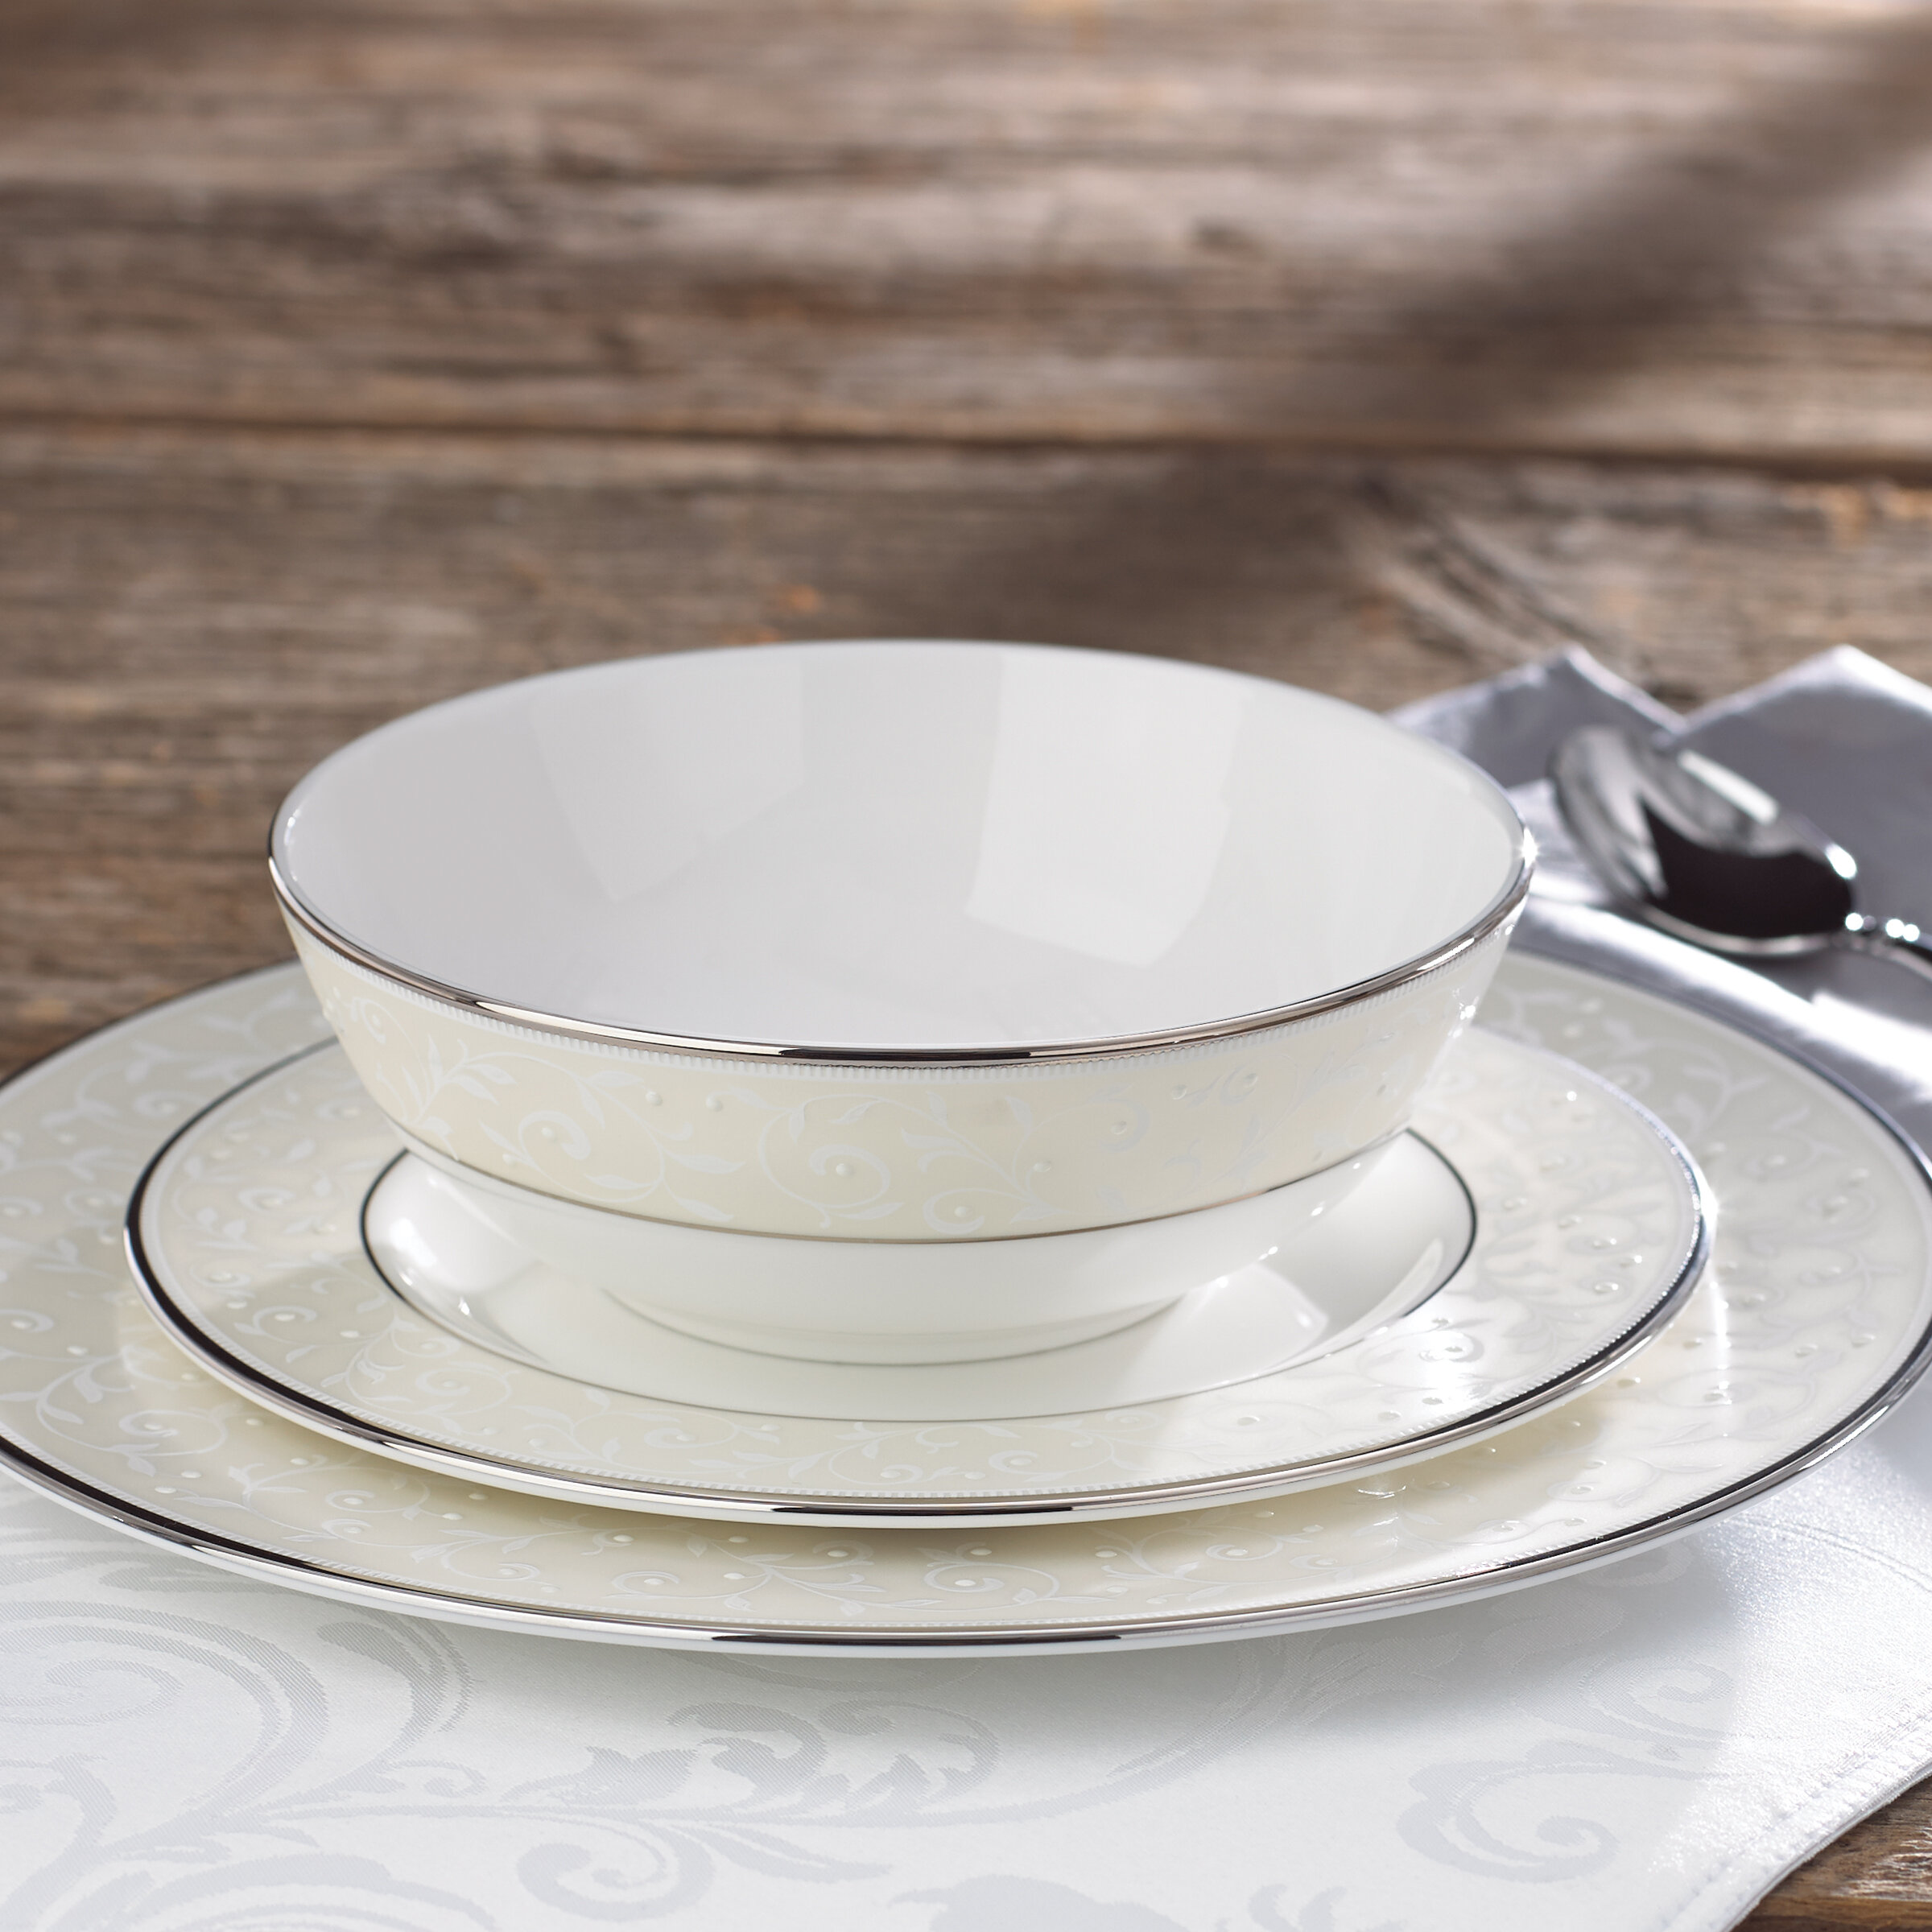 Stoneware vs. Bone China: What's the Difference? – Lenox Corporation